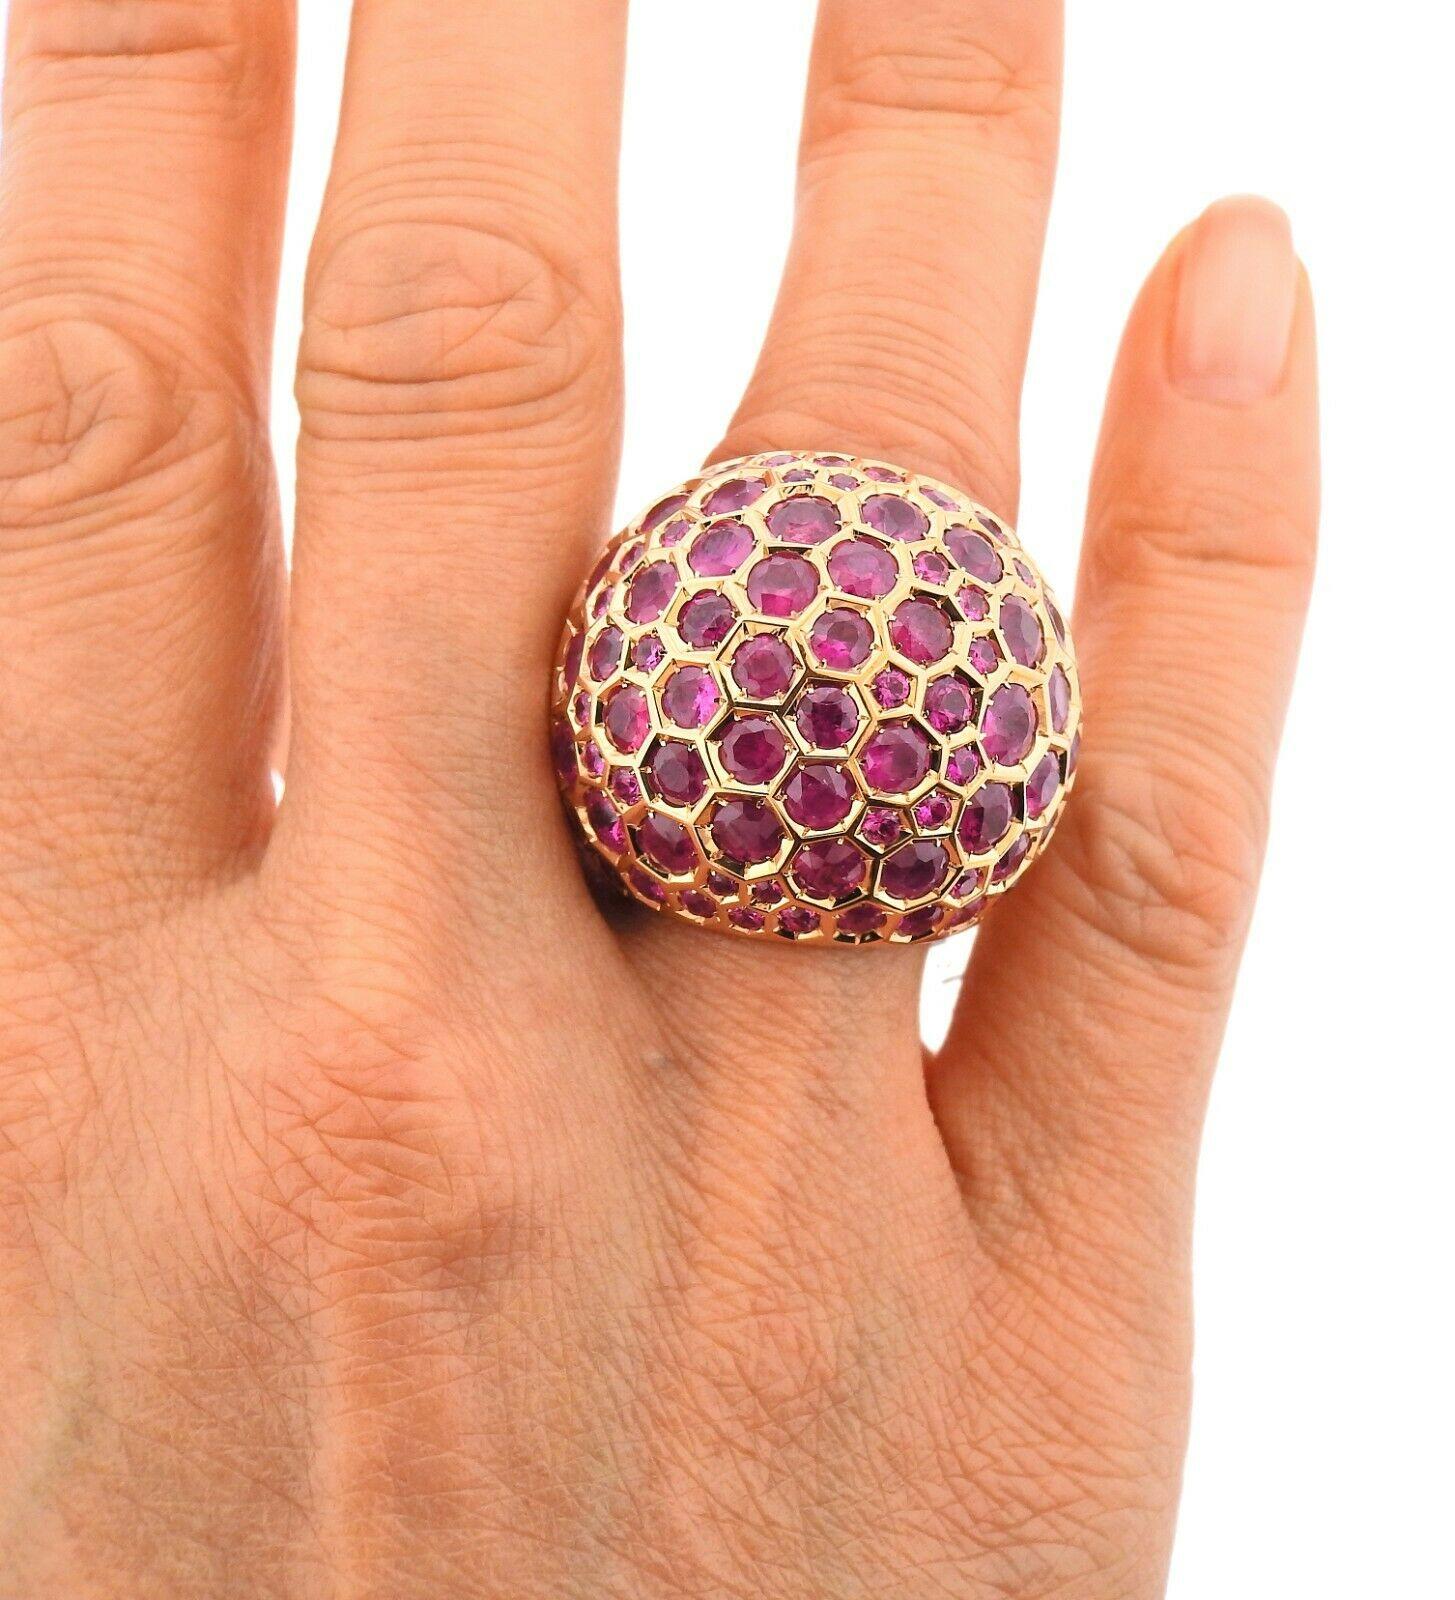 Brand new 18k rose gold dome ring by De Grisogono. Set with 14.95ctw of Pink Fuchsia Sapphires. Ring sizes - 6.5 (54)  ring top - 27mm wide. Marked -de Grisogono, Au750, B88537. Weight - 22.5 grams. The ring comes with COA, booklet, and box. Retail